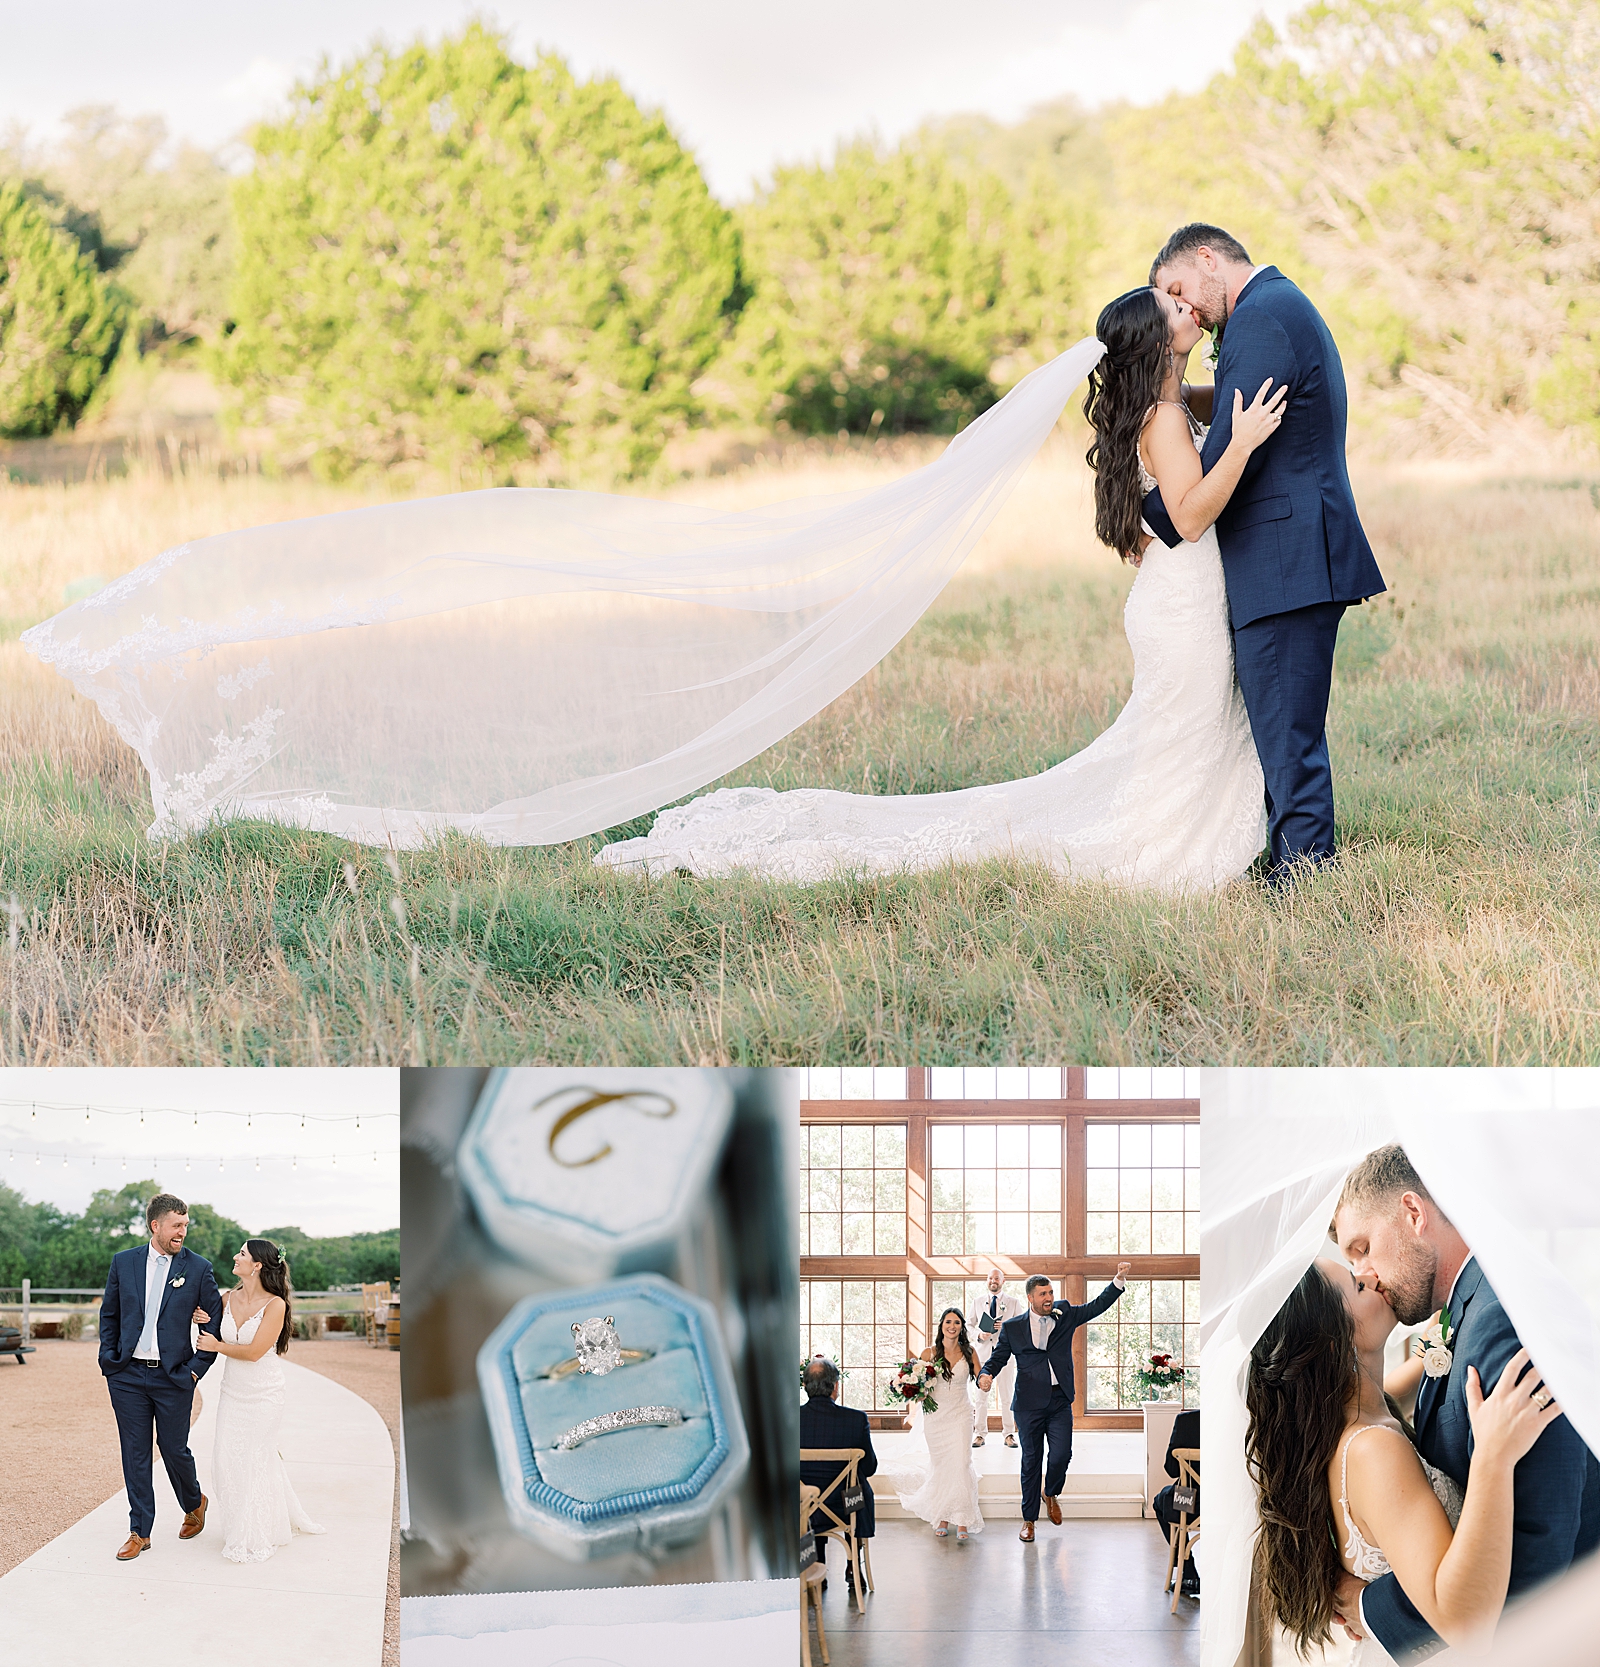 This navy, light gray, with pops of burgundy wedding day is some serious color palette inspo! In Dripping Springs, Texas at Saddle Creek Weddings, this day was full of elegance, fun and thoughtful details. Click through to see all the pretty! #weddingdayinspiration #dustybluewedding #austintexaswedding #hillcountrywedding